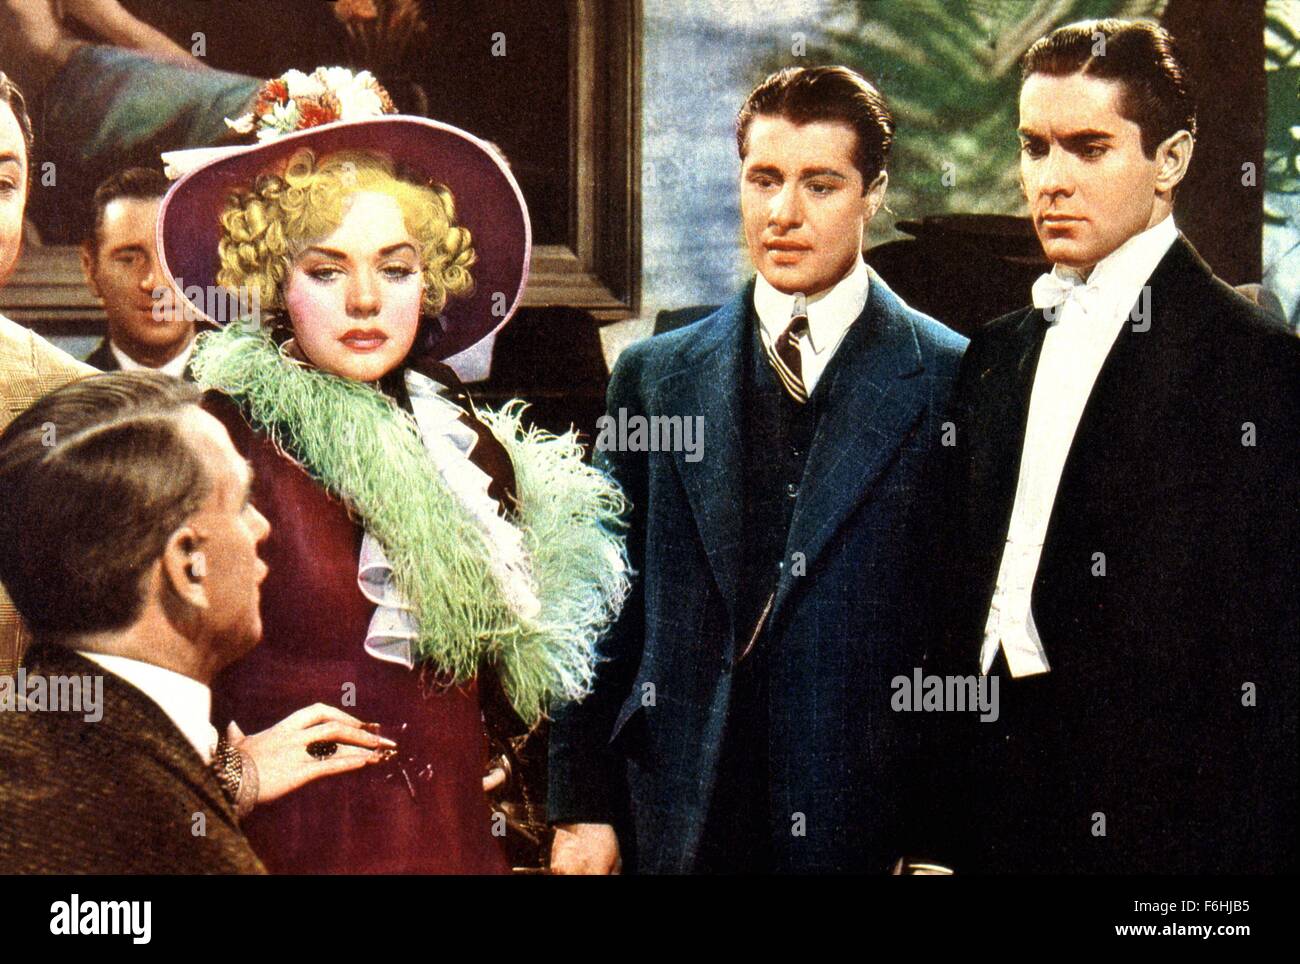 1938, Film Title: ALEXANDER'S RAGTIME BAND, Director: HENRY KING, Studio: FOX, Pictured: DON AMECHE, ALICE FAYE, HENRY KING. (Credit Image: SNAP) Stock Photo